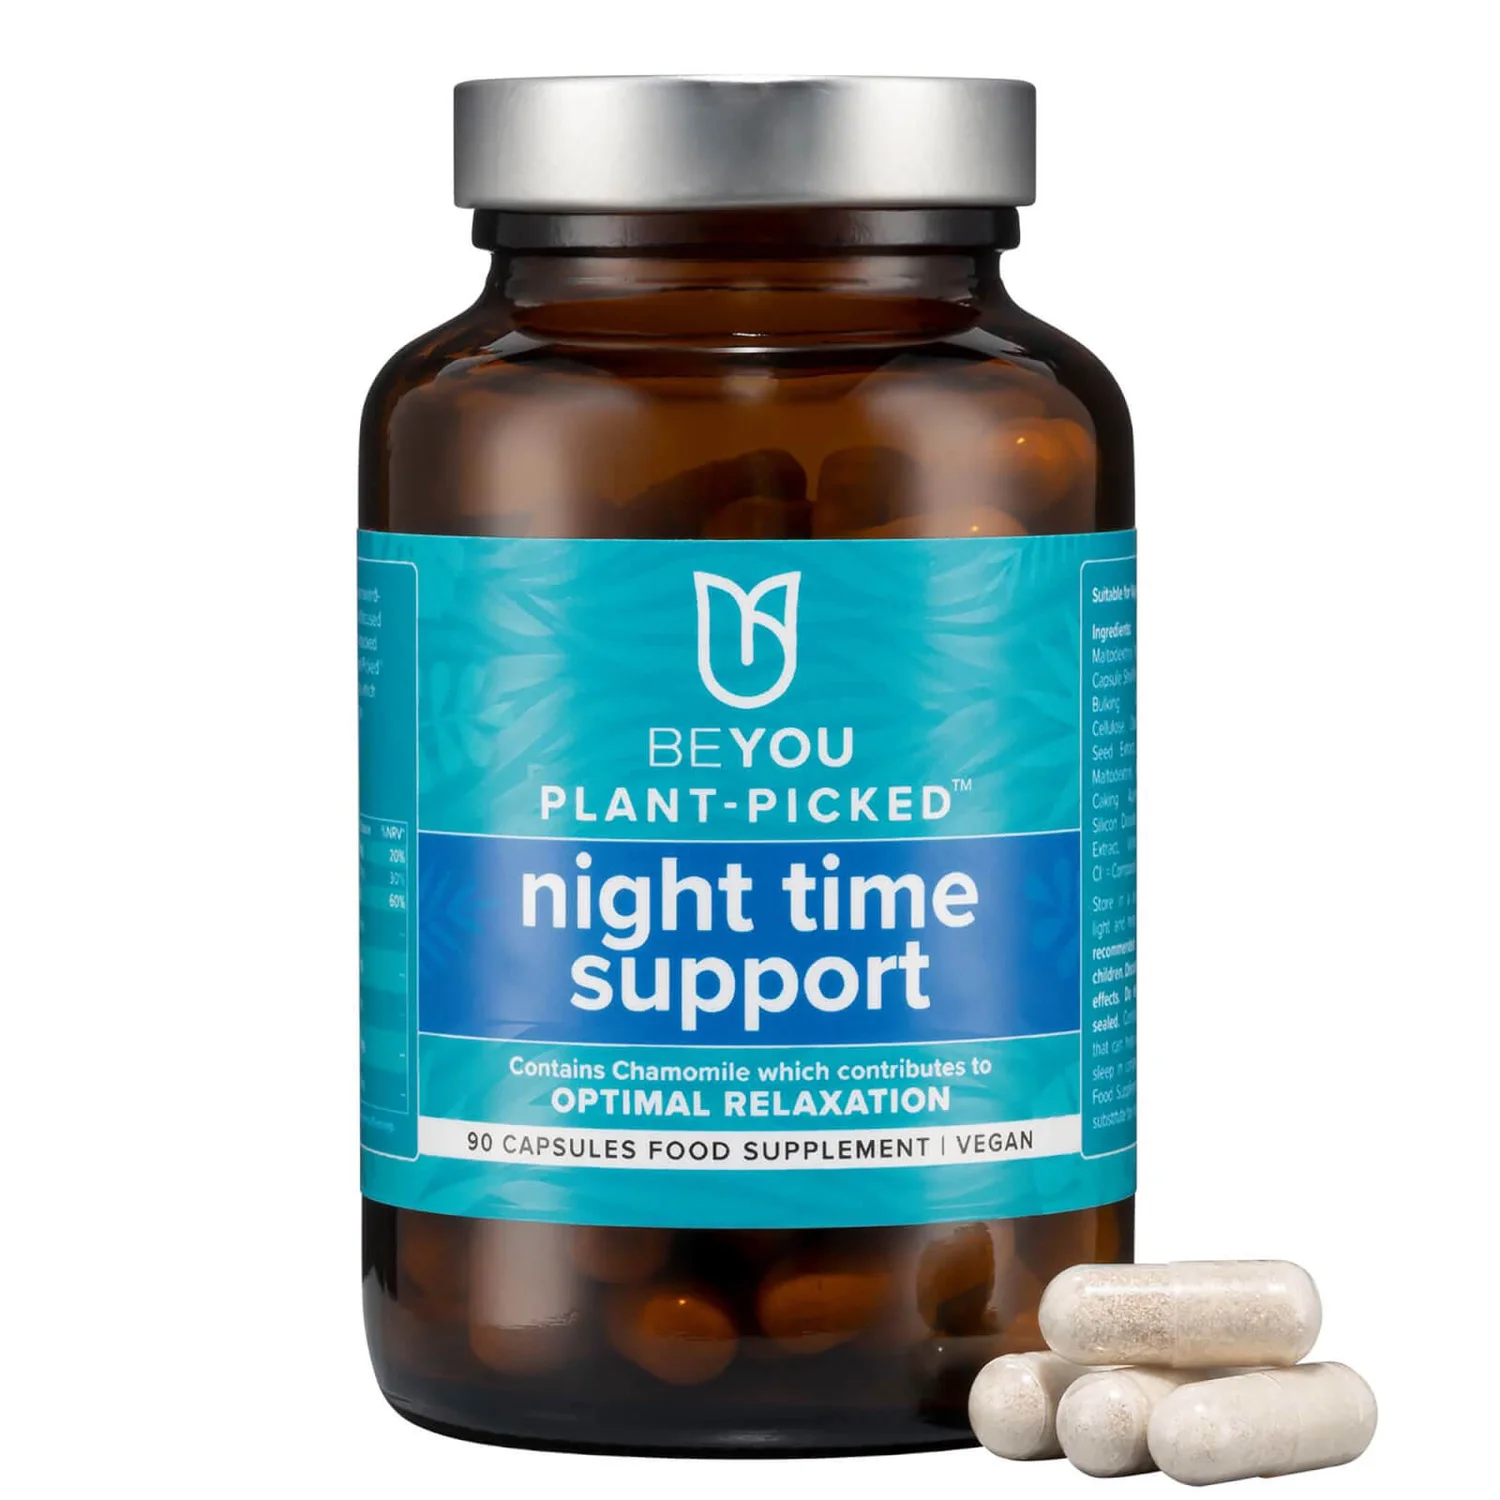 cultbeauty.com | BEYOU PLANT-PICKED NIGHT TIME SUPPORT VITAMIN SUPPLEMENTS - 90 CAPSULES